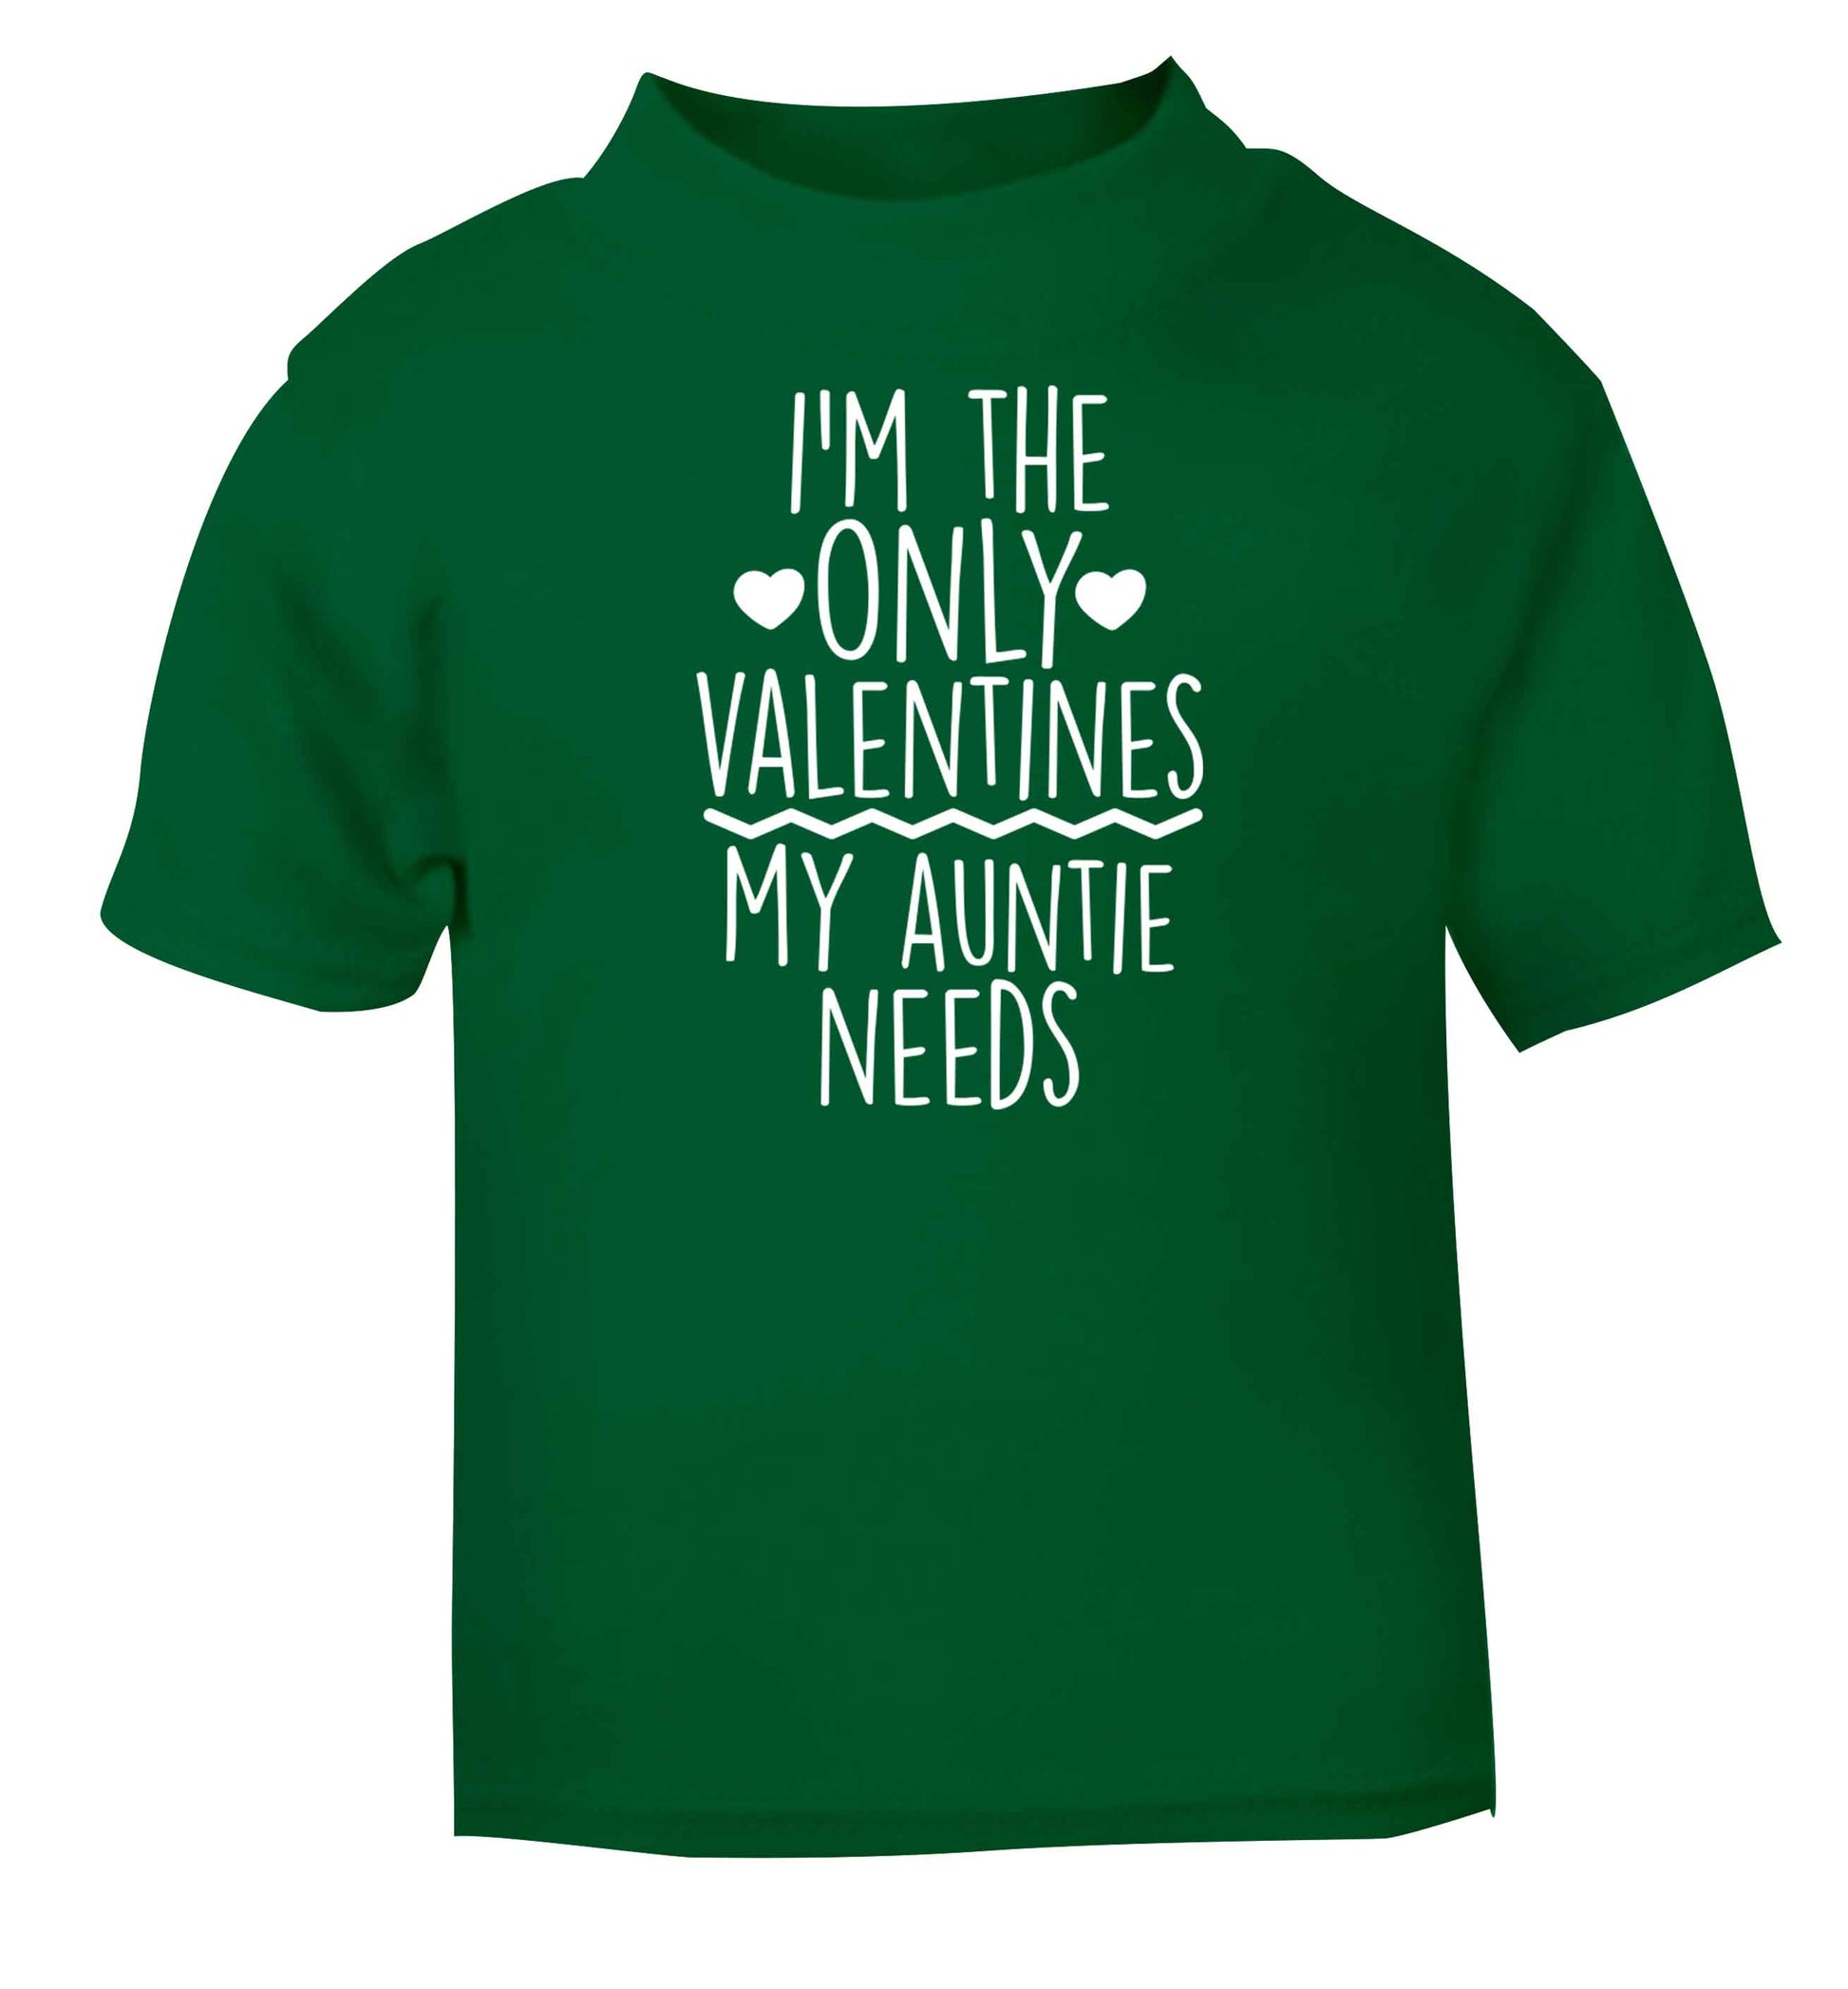 I'm the only valentines my auntie needs green baby toddler Tshirt 2 Years